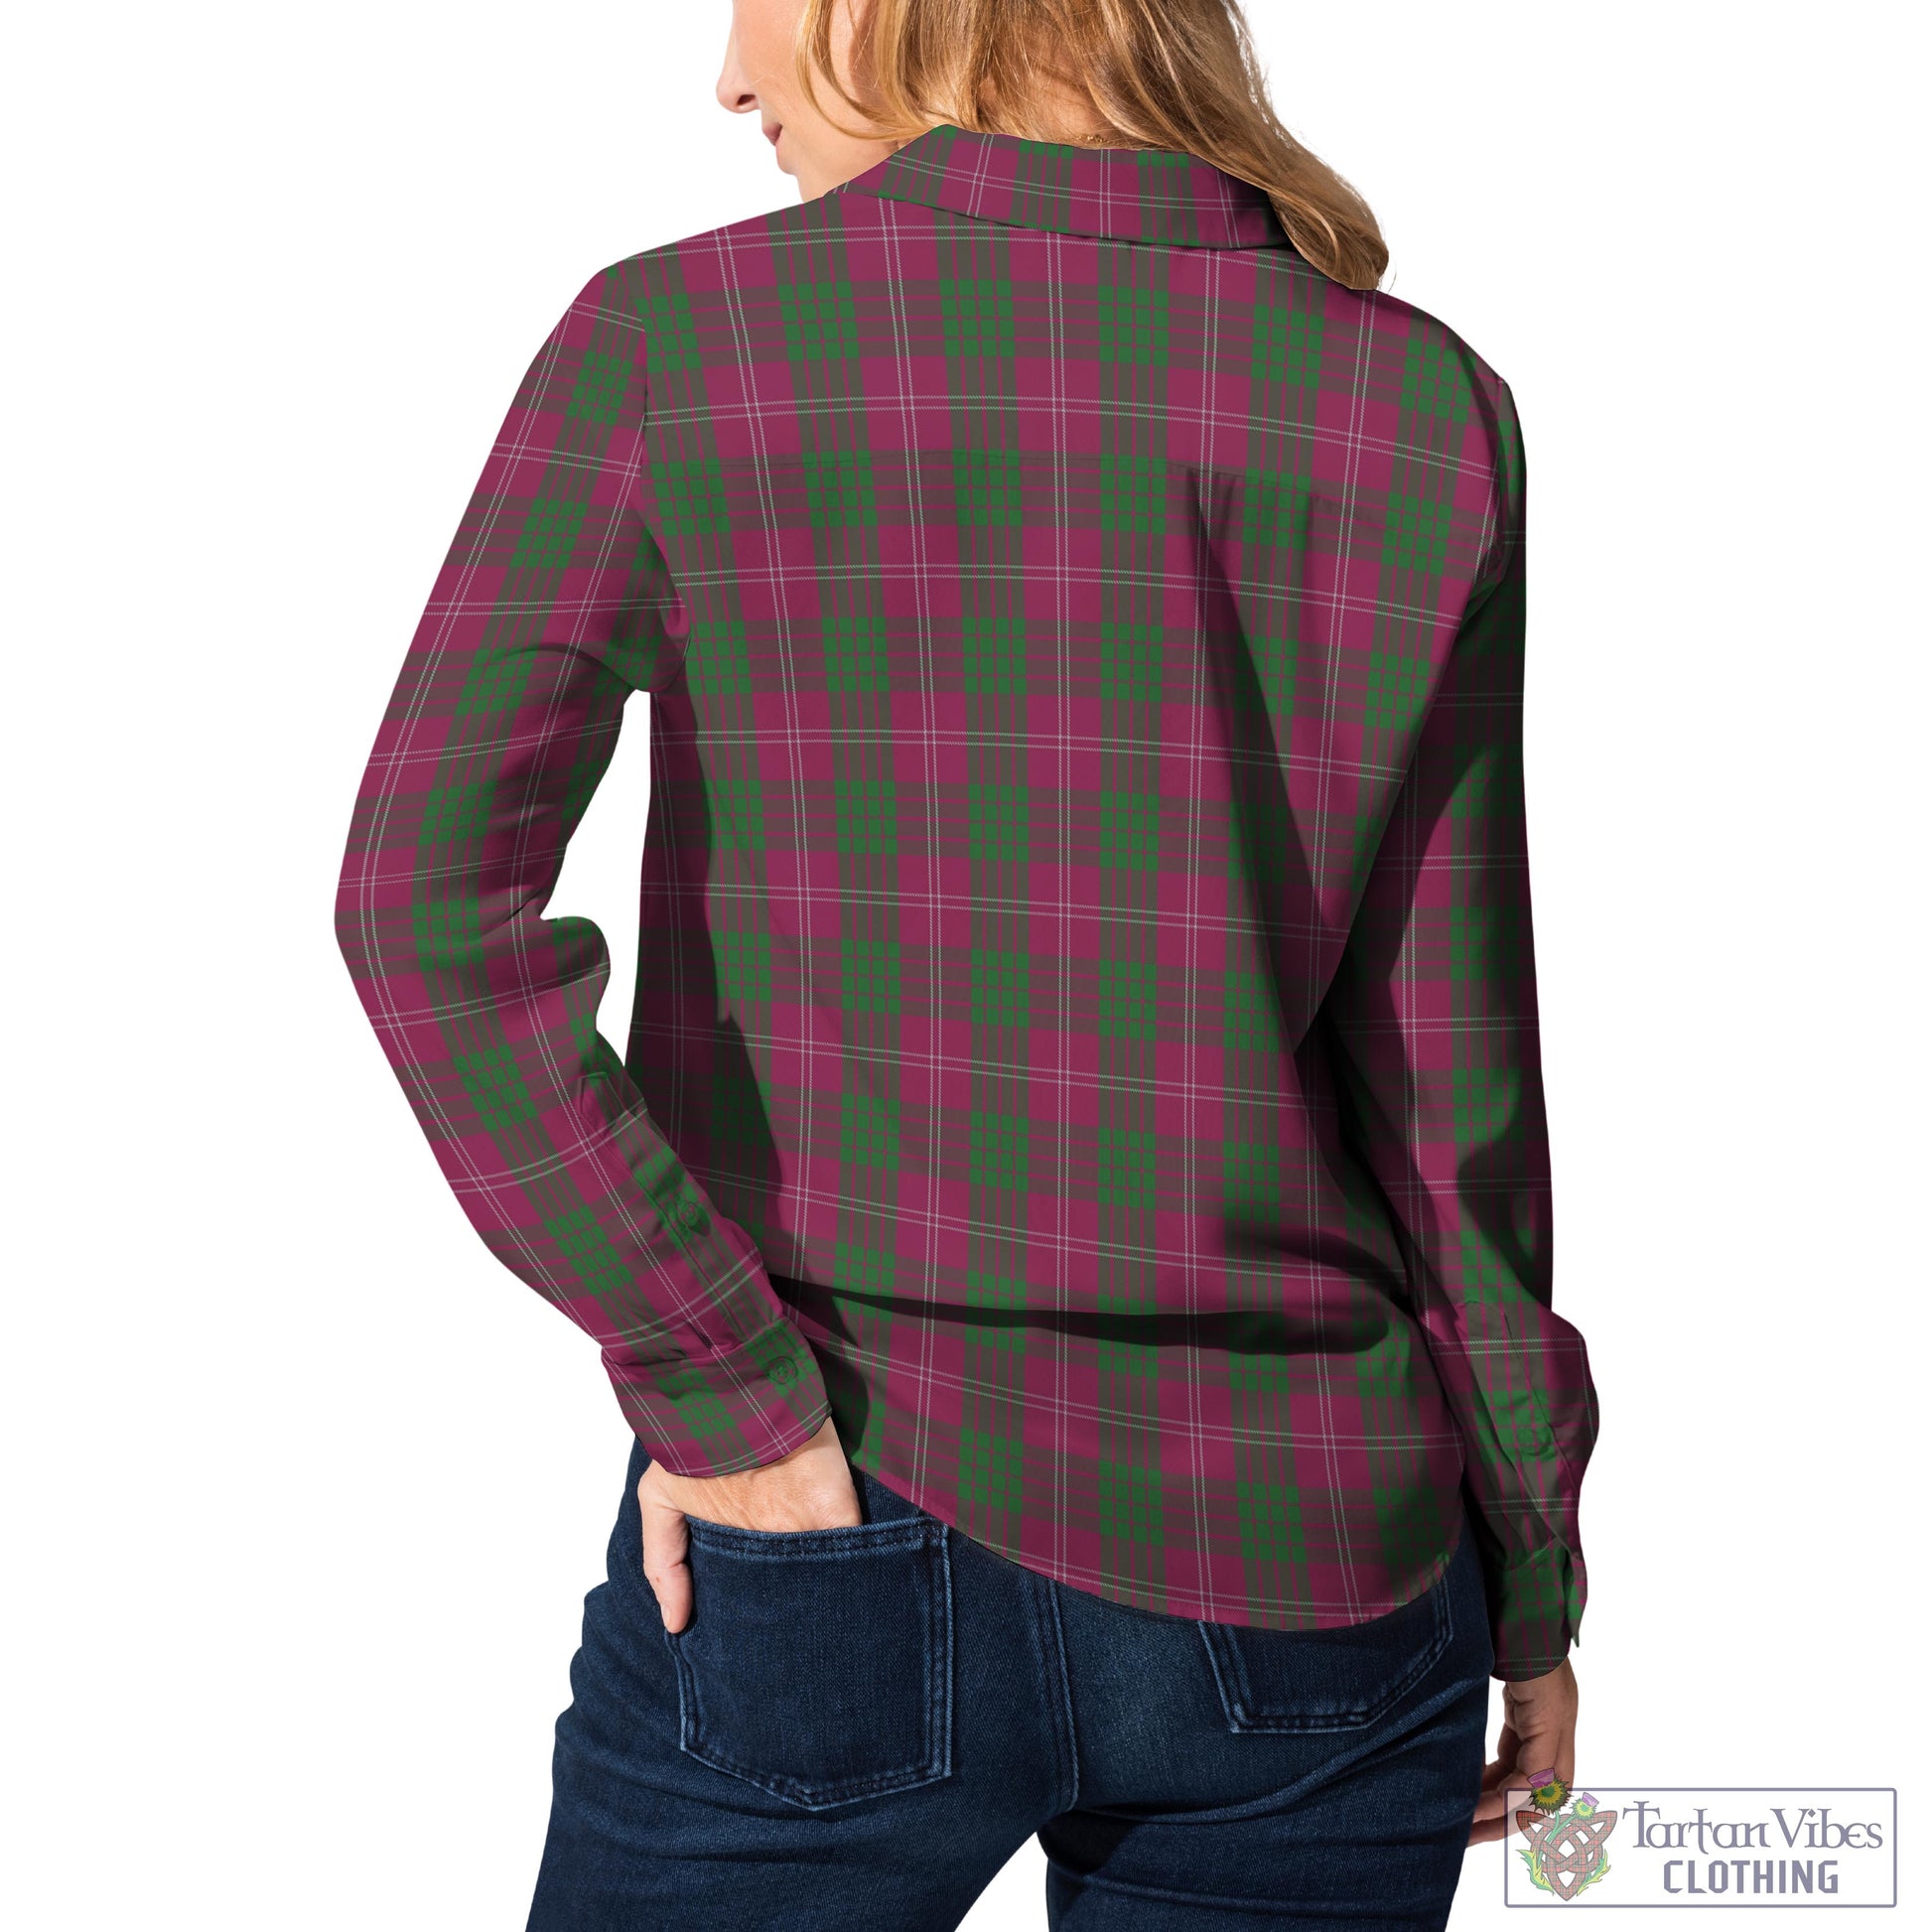 Tartan Vibes Clothing Crawford Tartan Womens Casual Shirt with Family Crest